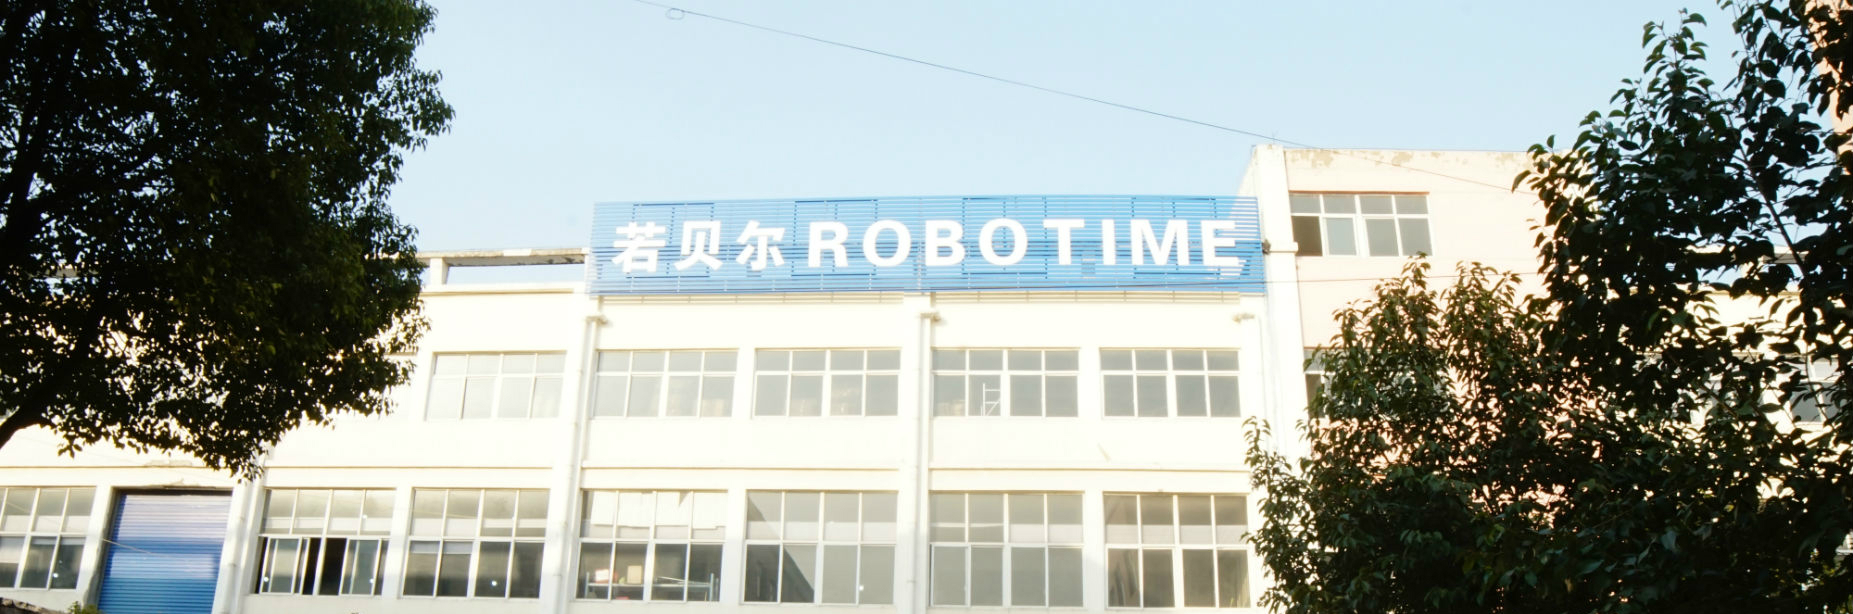 What the consumers say about Robotime